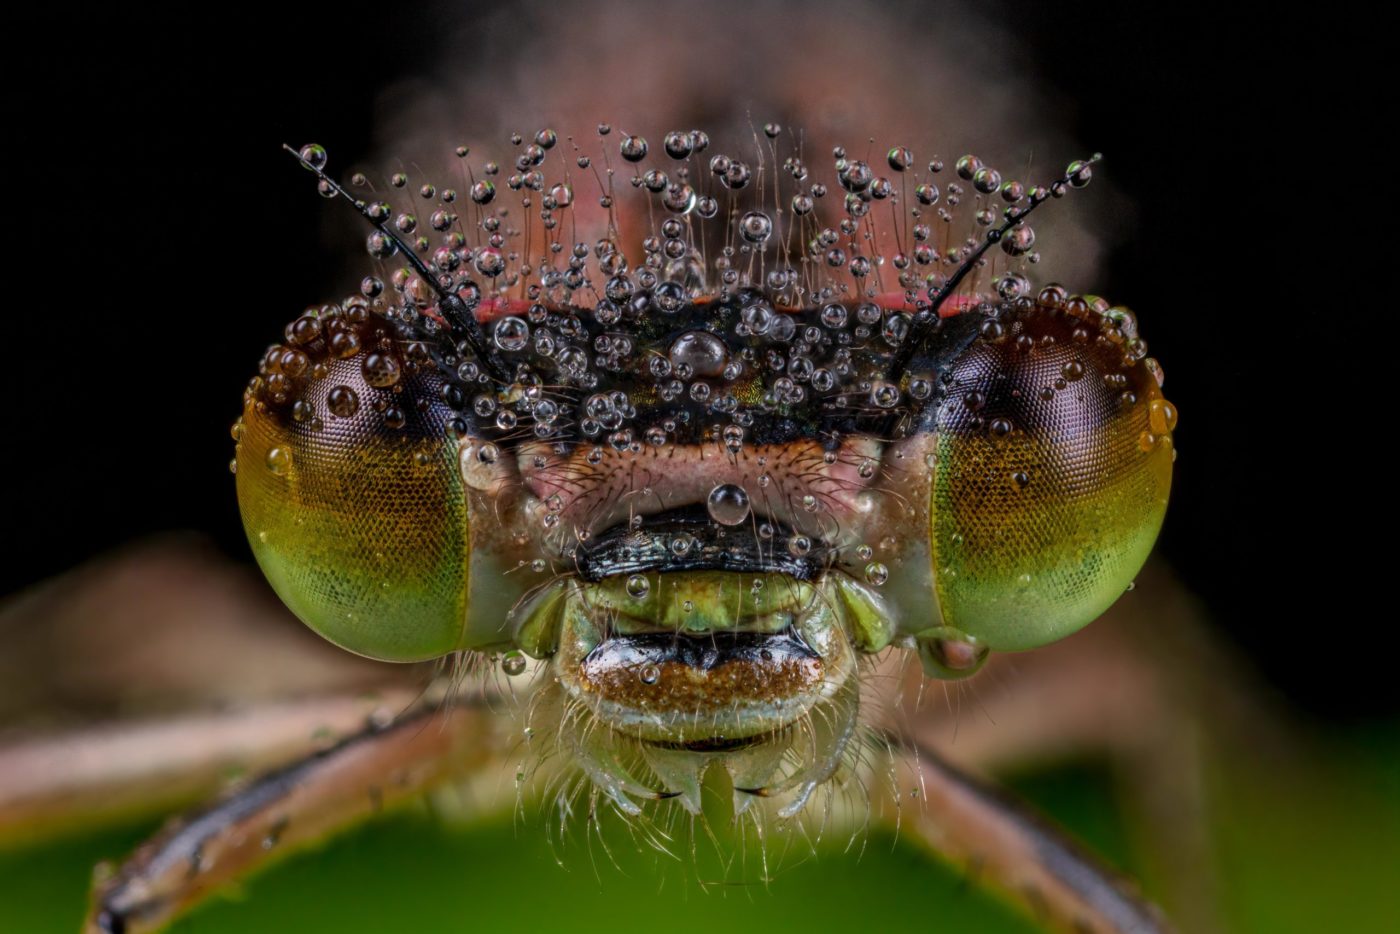 Extreme close-up of a female Blue-tailed Damselfly, Ischnura elegans